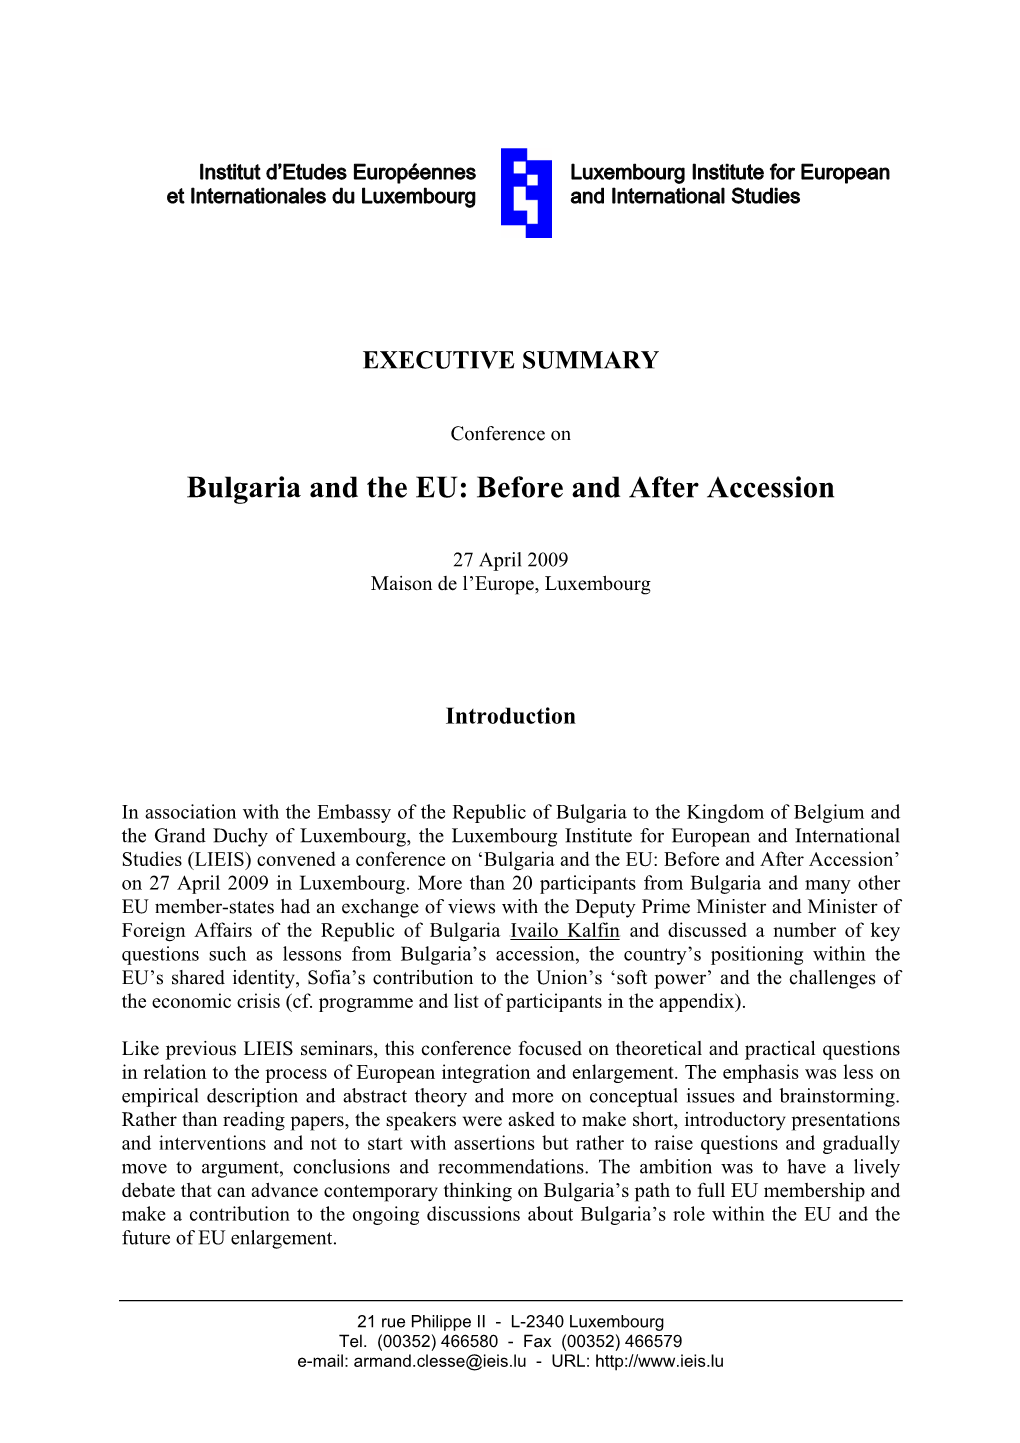 Bulgaria and the EU: Before and After Accession